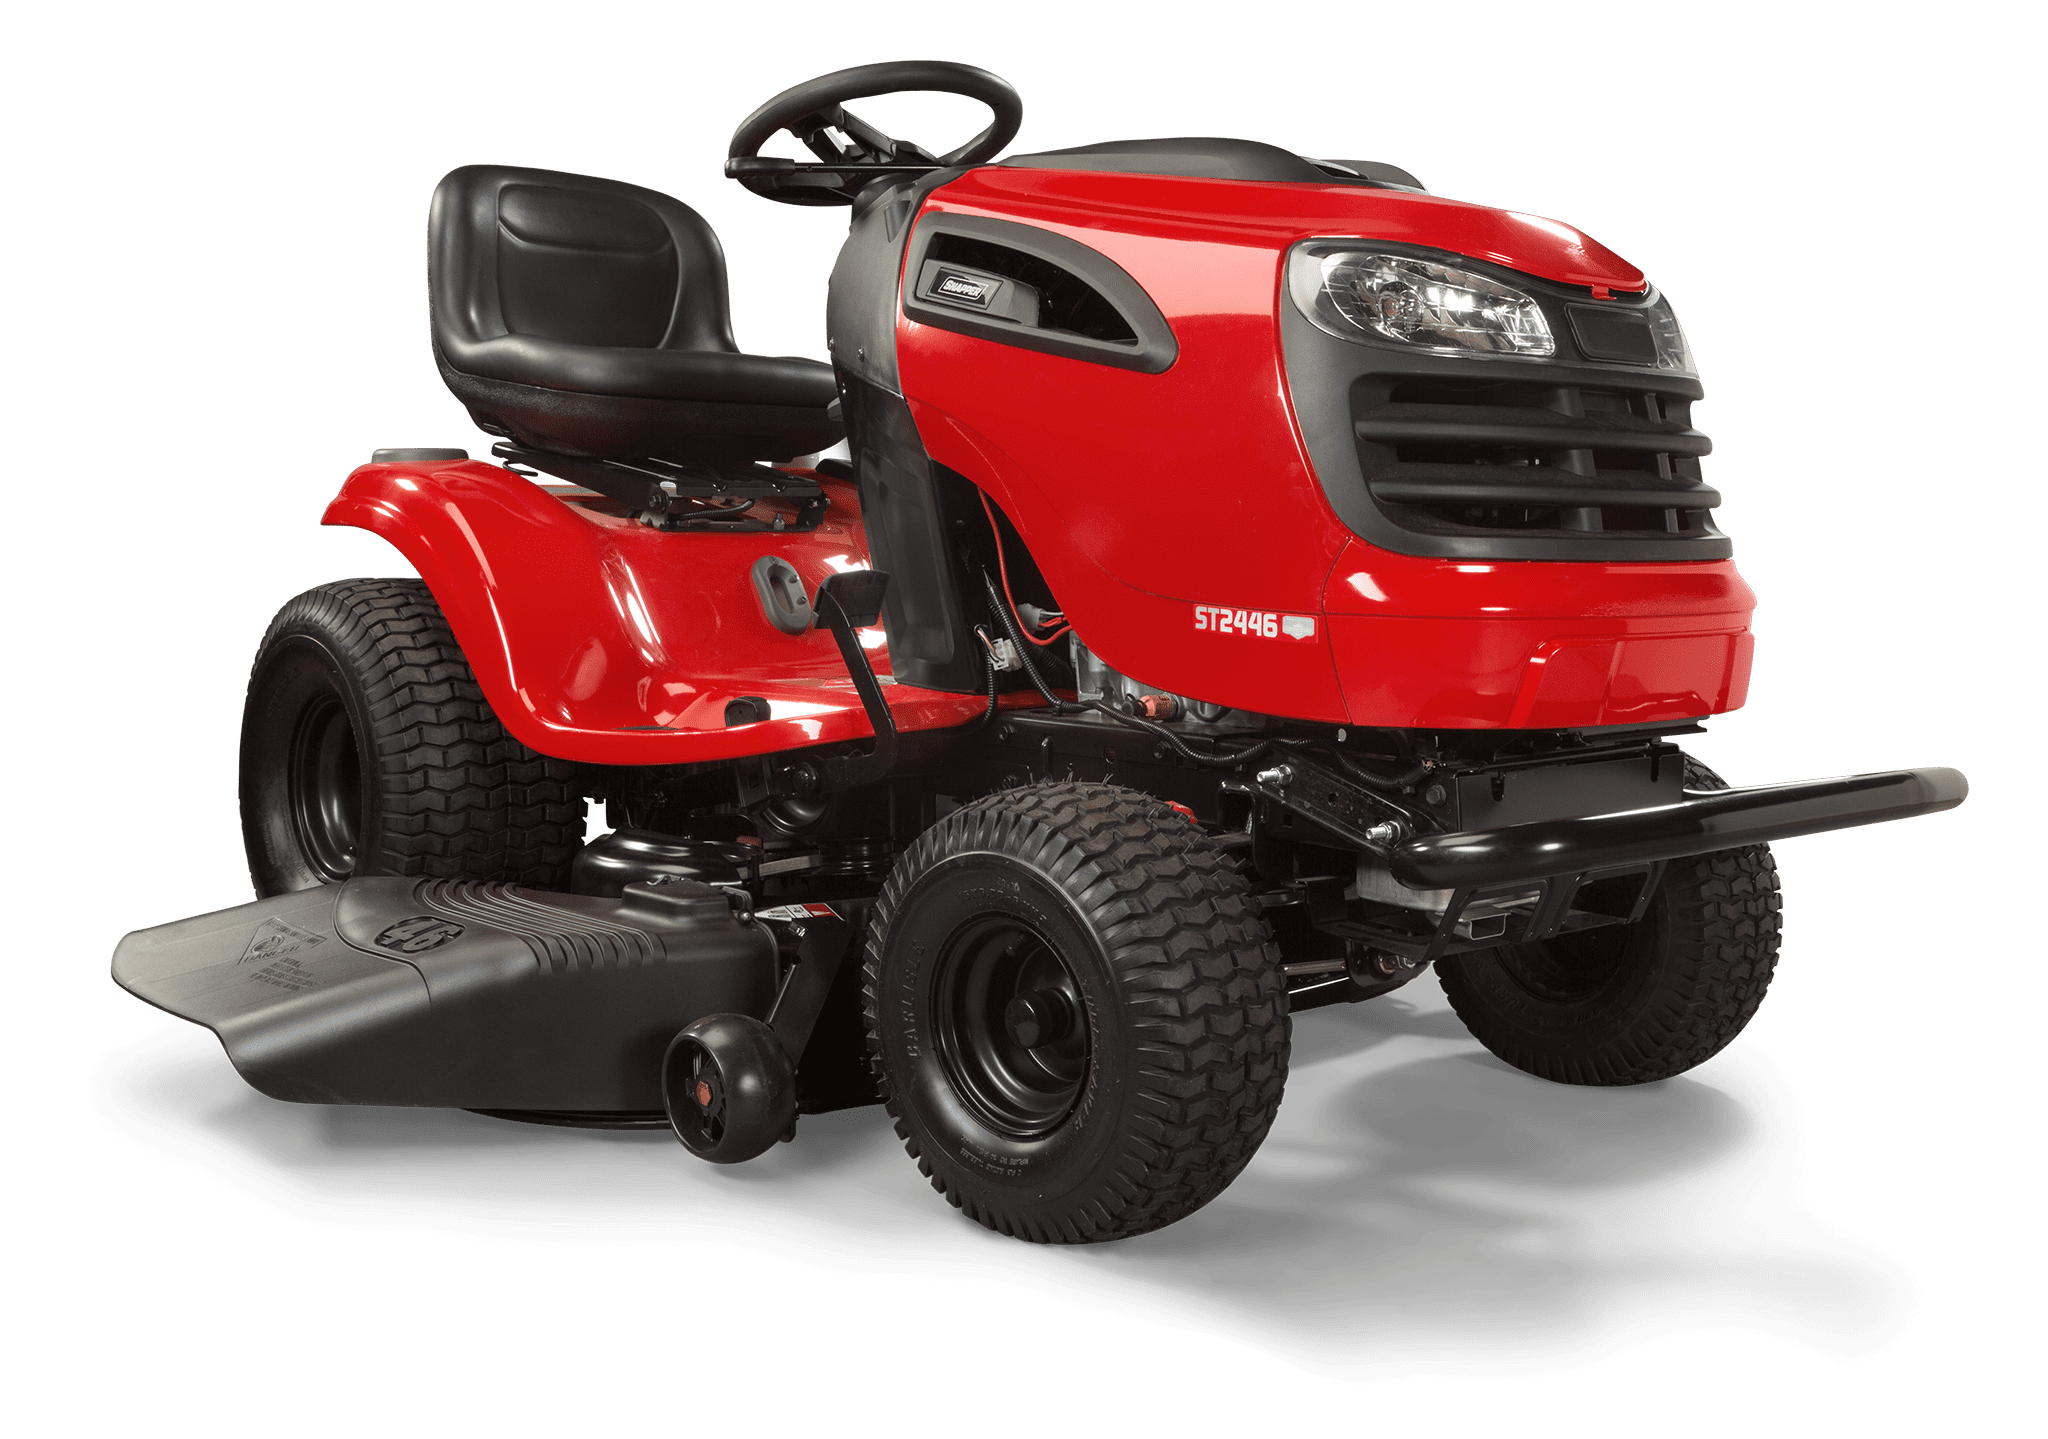 Snapper 46 In 24 Hp Briggs And Stratton Riding Mower